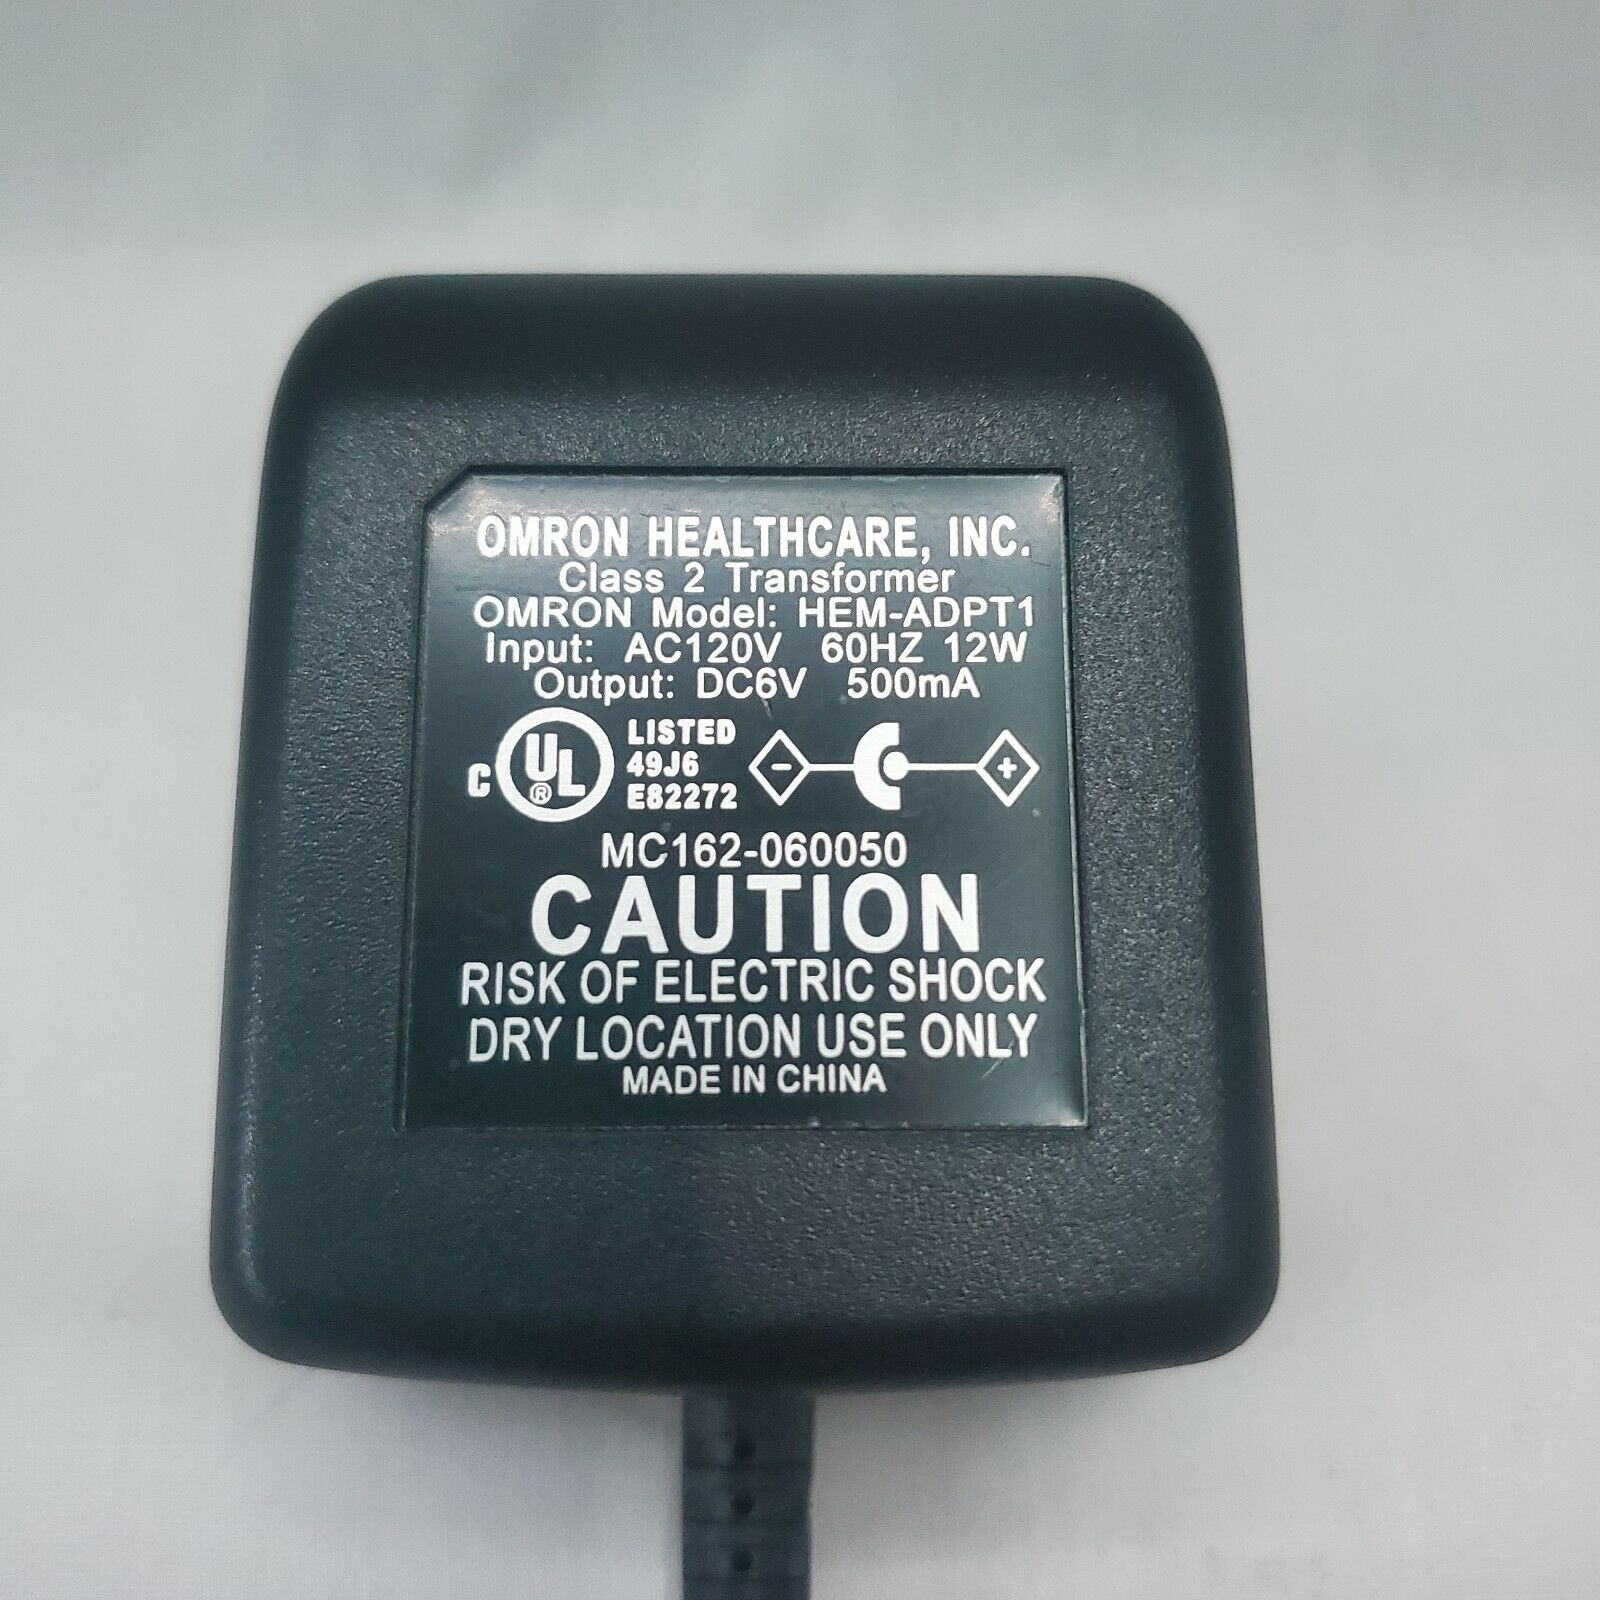 omron healthcare inc mc162-060050 6v 500ma ac to dc adaptor Type: AC/DC Adapter Output Voltage: 6 V Brand: omron - Click Image to Close